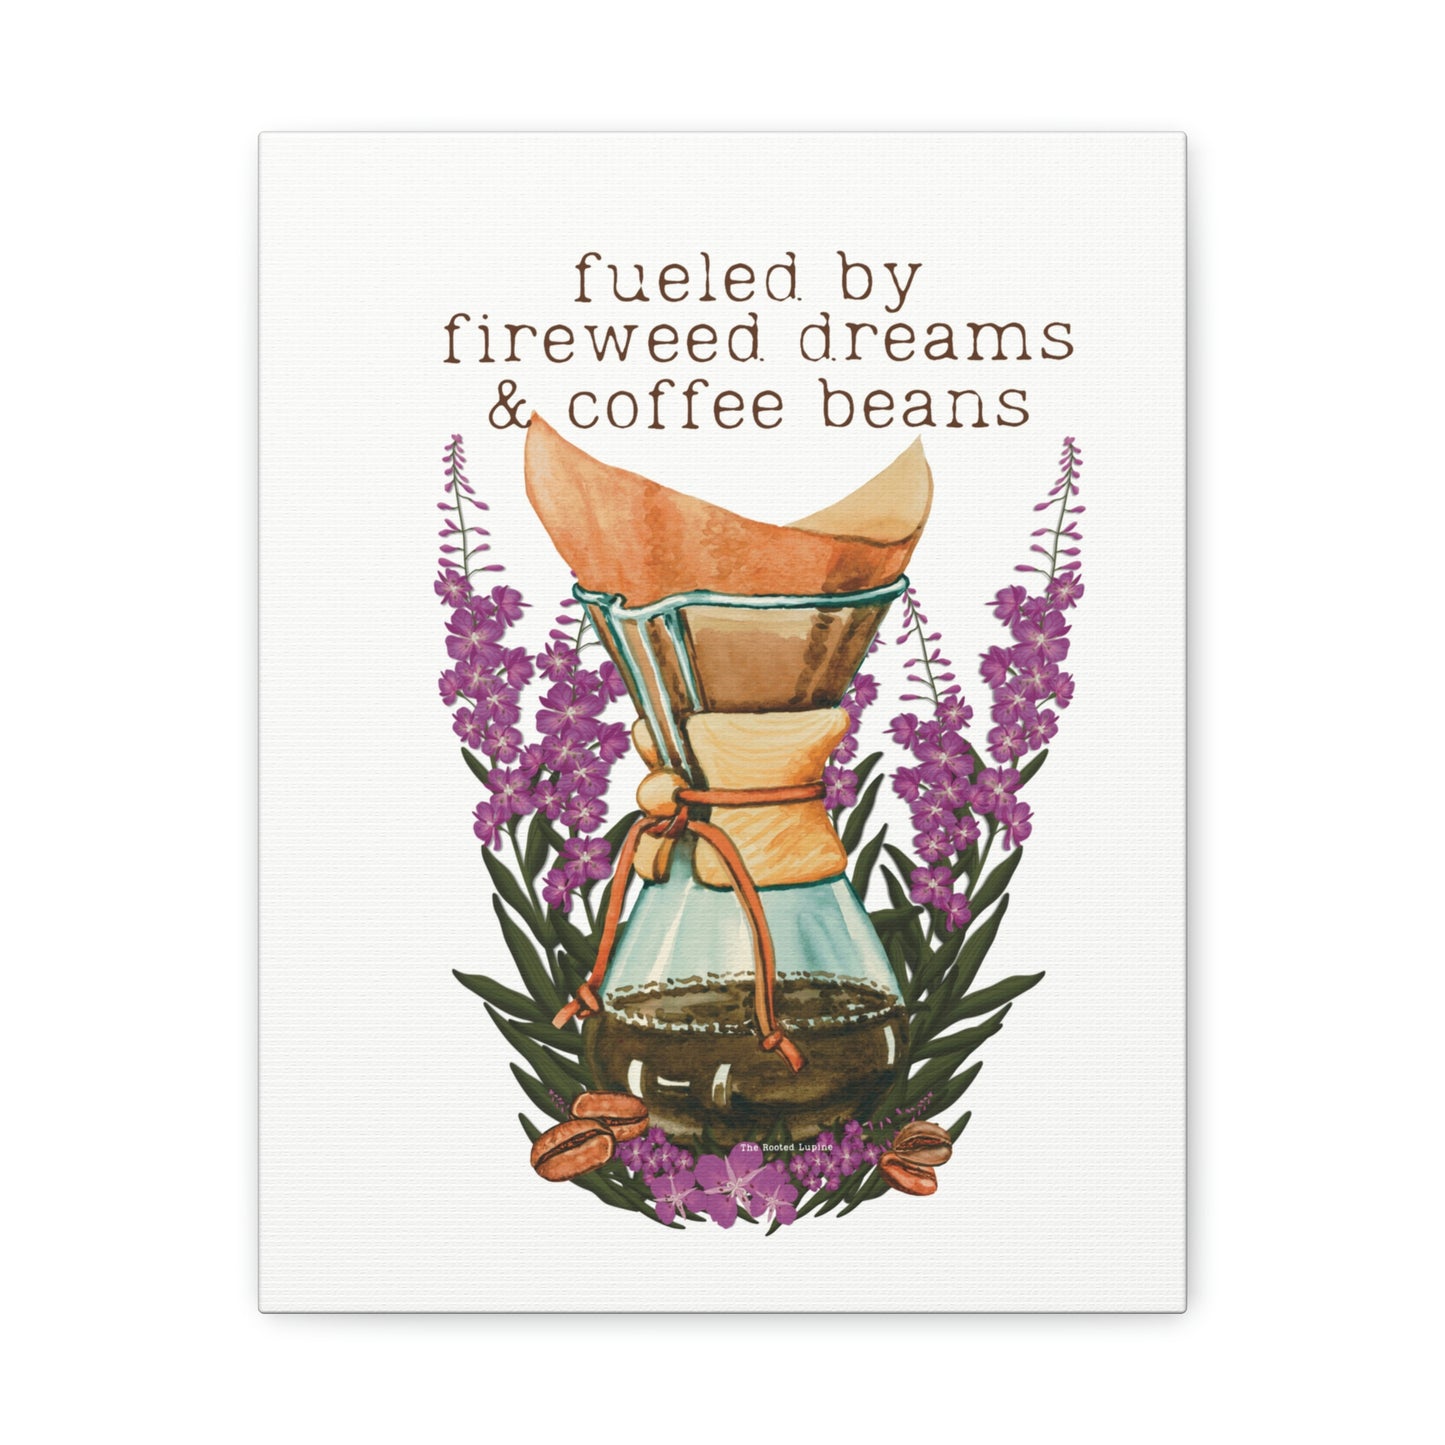 Fueled by Fireweed Dreams canvas